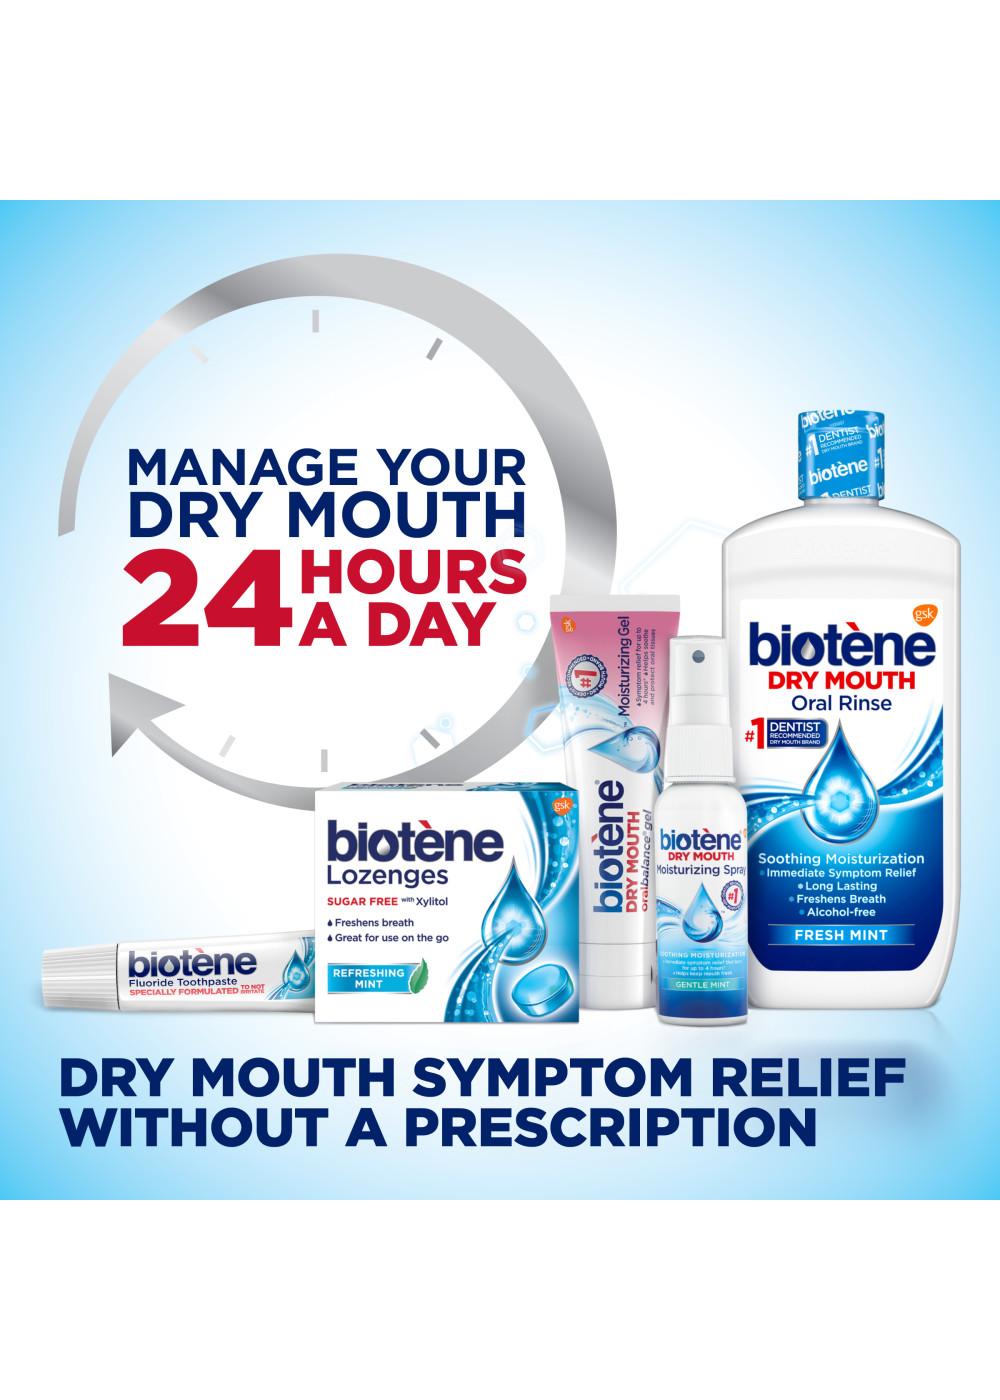 Biotene Dry Mouth Oral Rinse - Fresh Mint; image 10 of 10